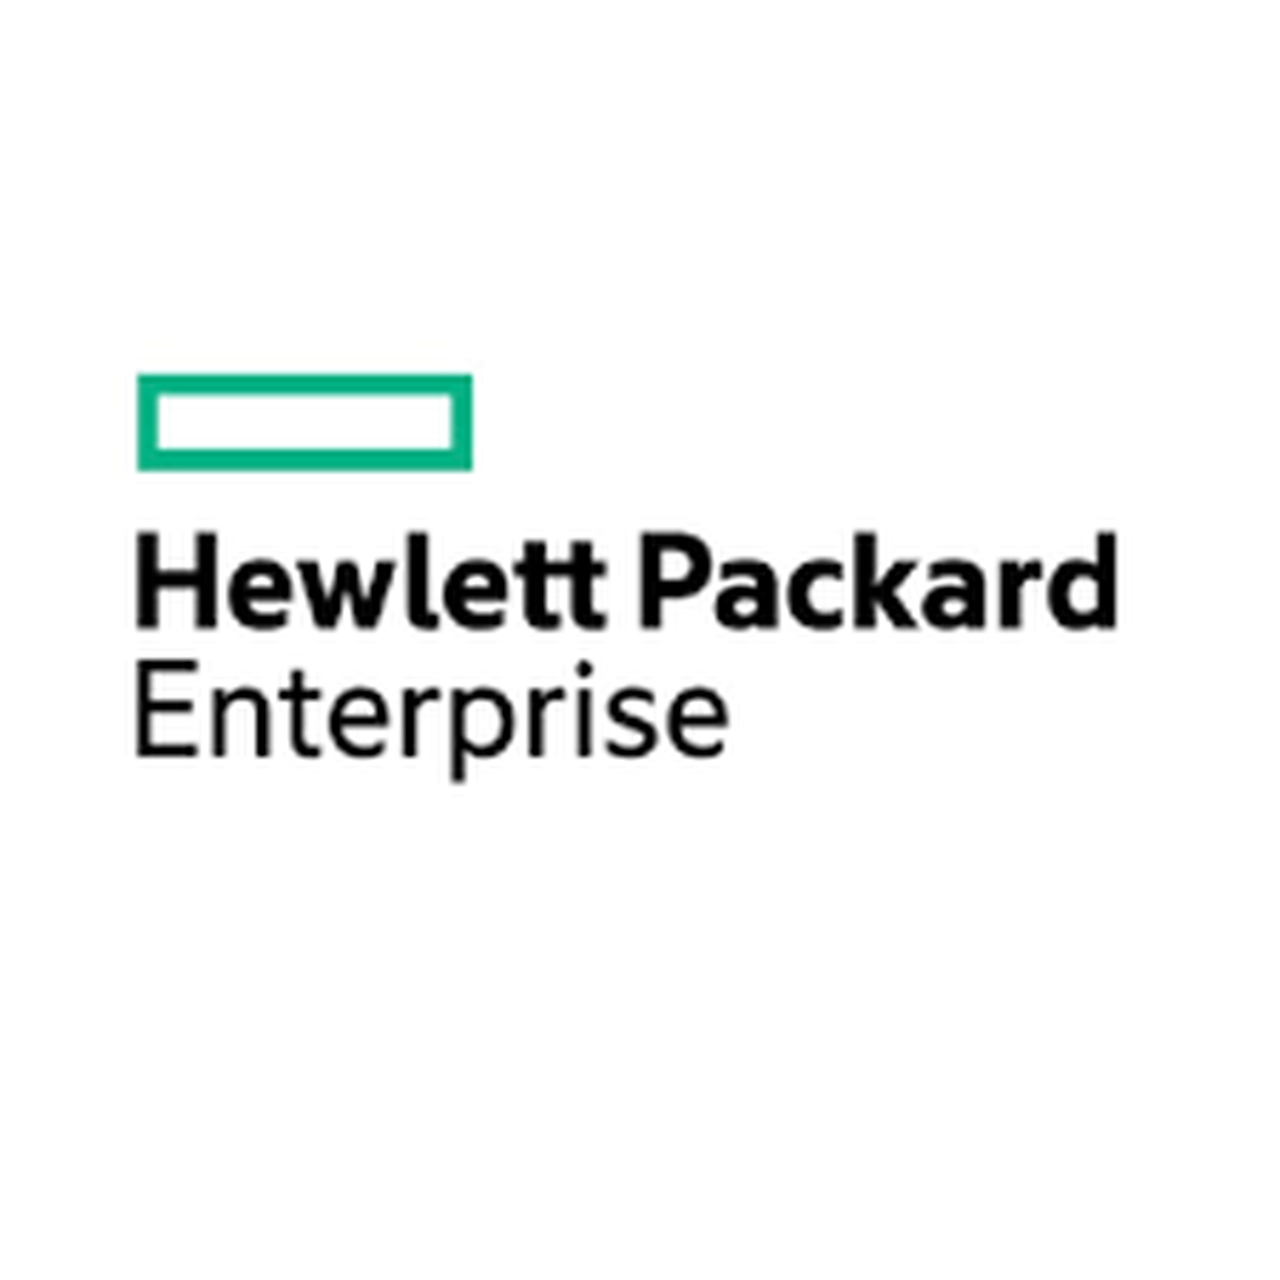 HPE 5940 48p 10G/6p 100G 2 Reman F PS Factory integrated